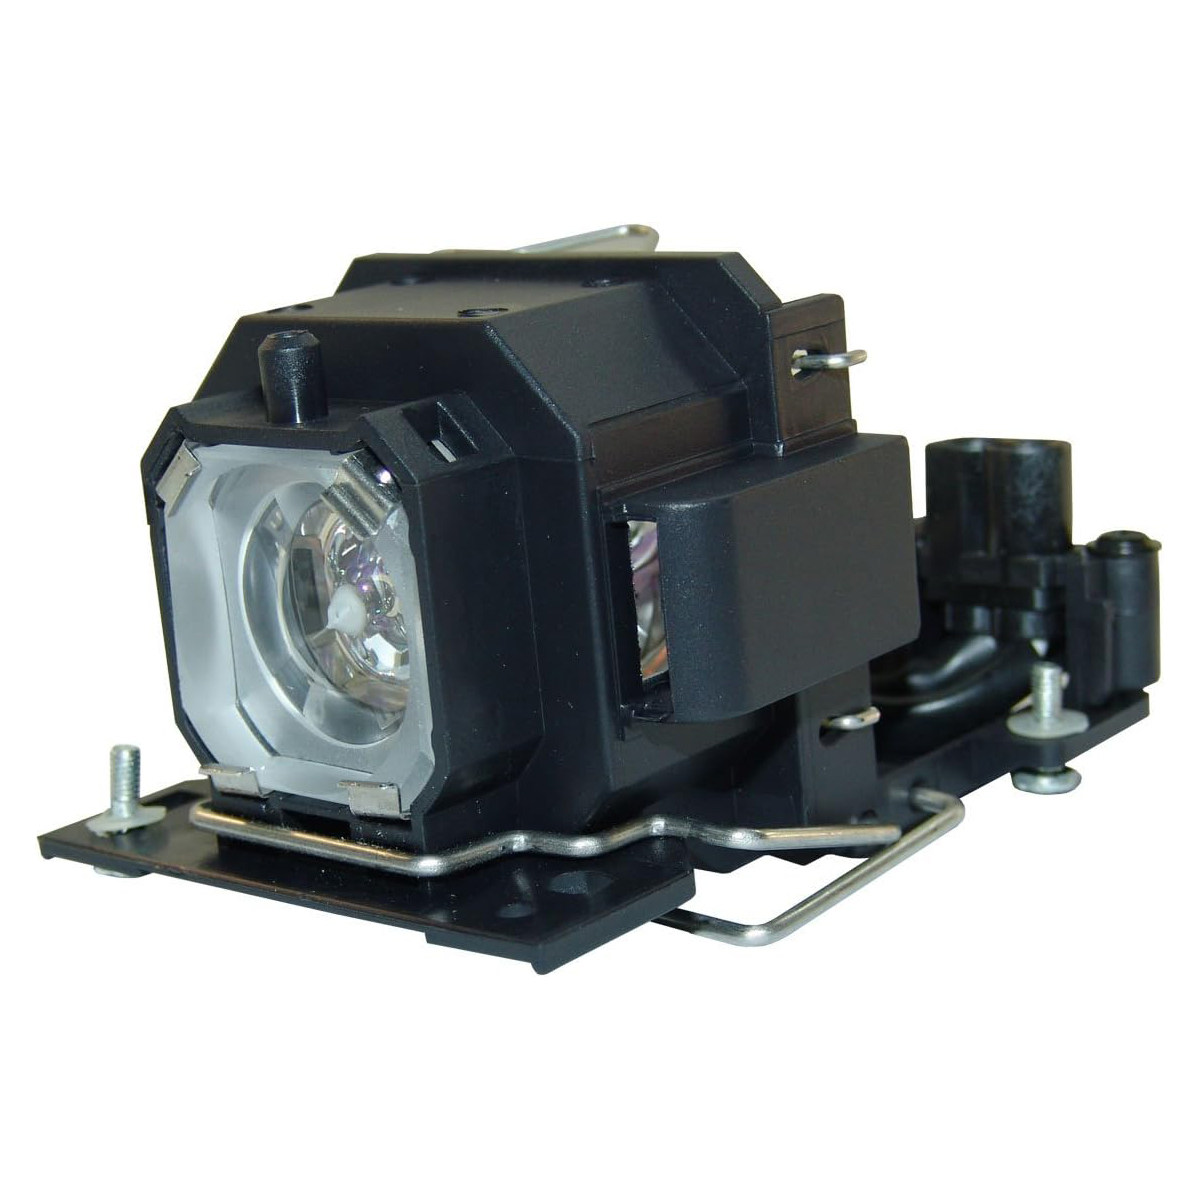 Replacement Projector lamp DT00781 For Hitachi CP-RX70 CP-X1 CP-X2 CP-X253